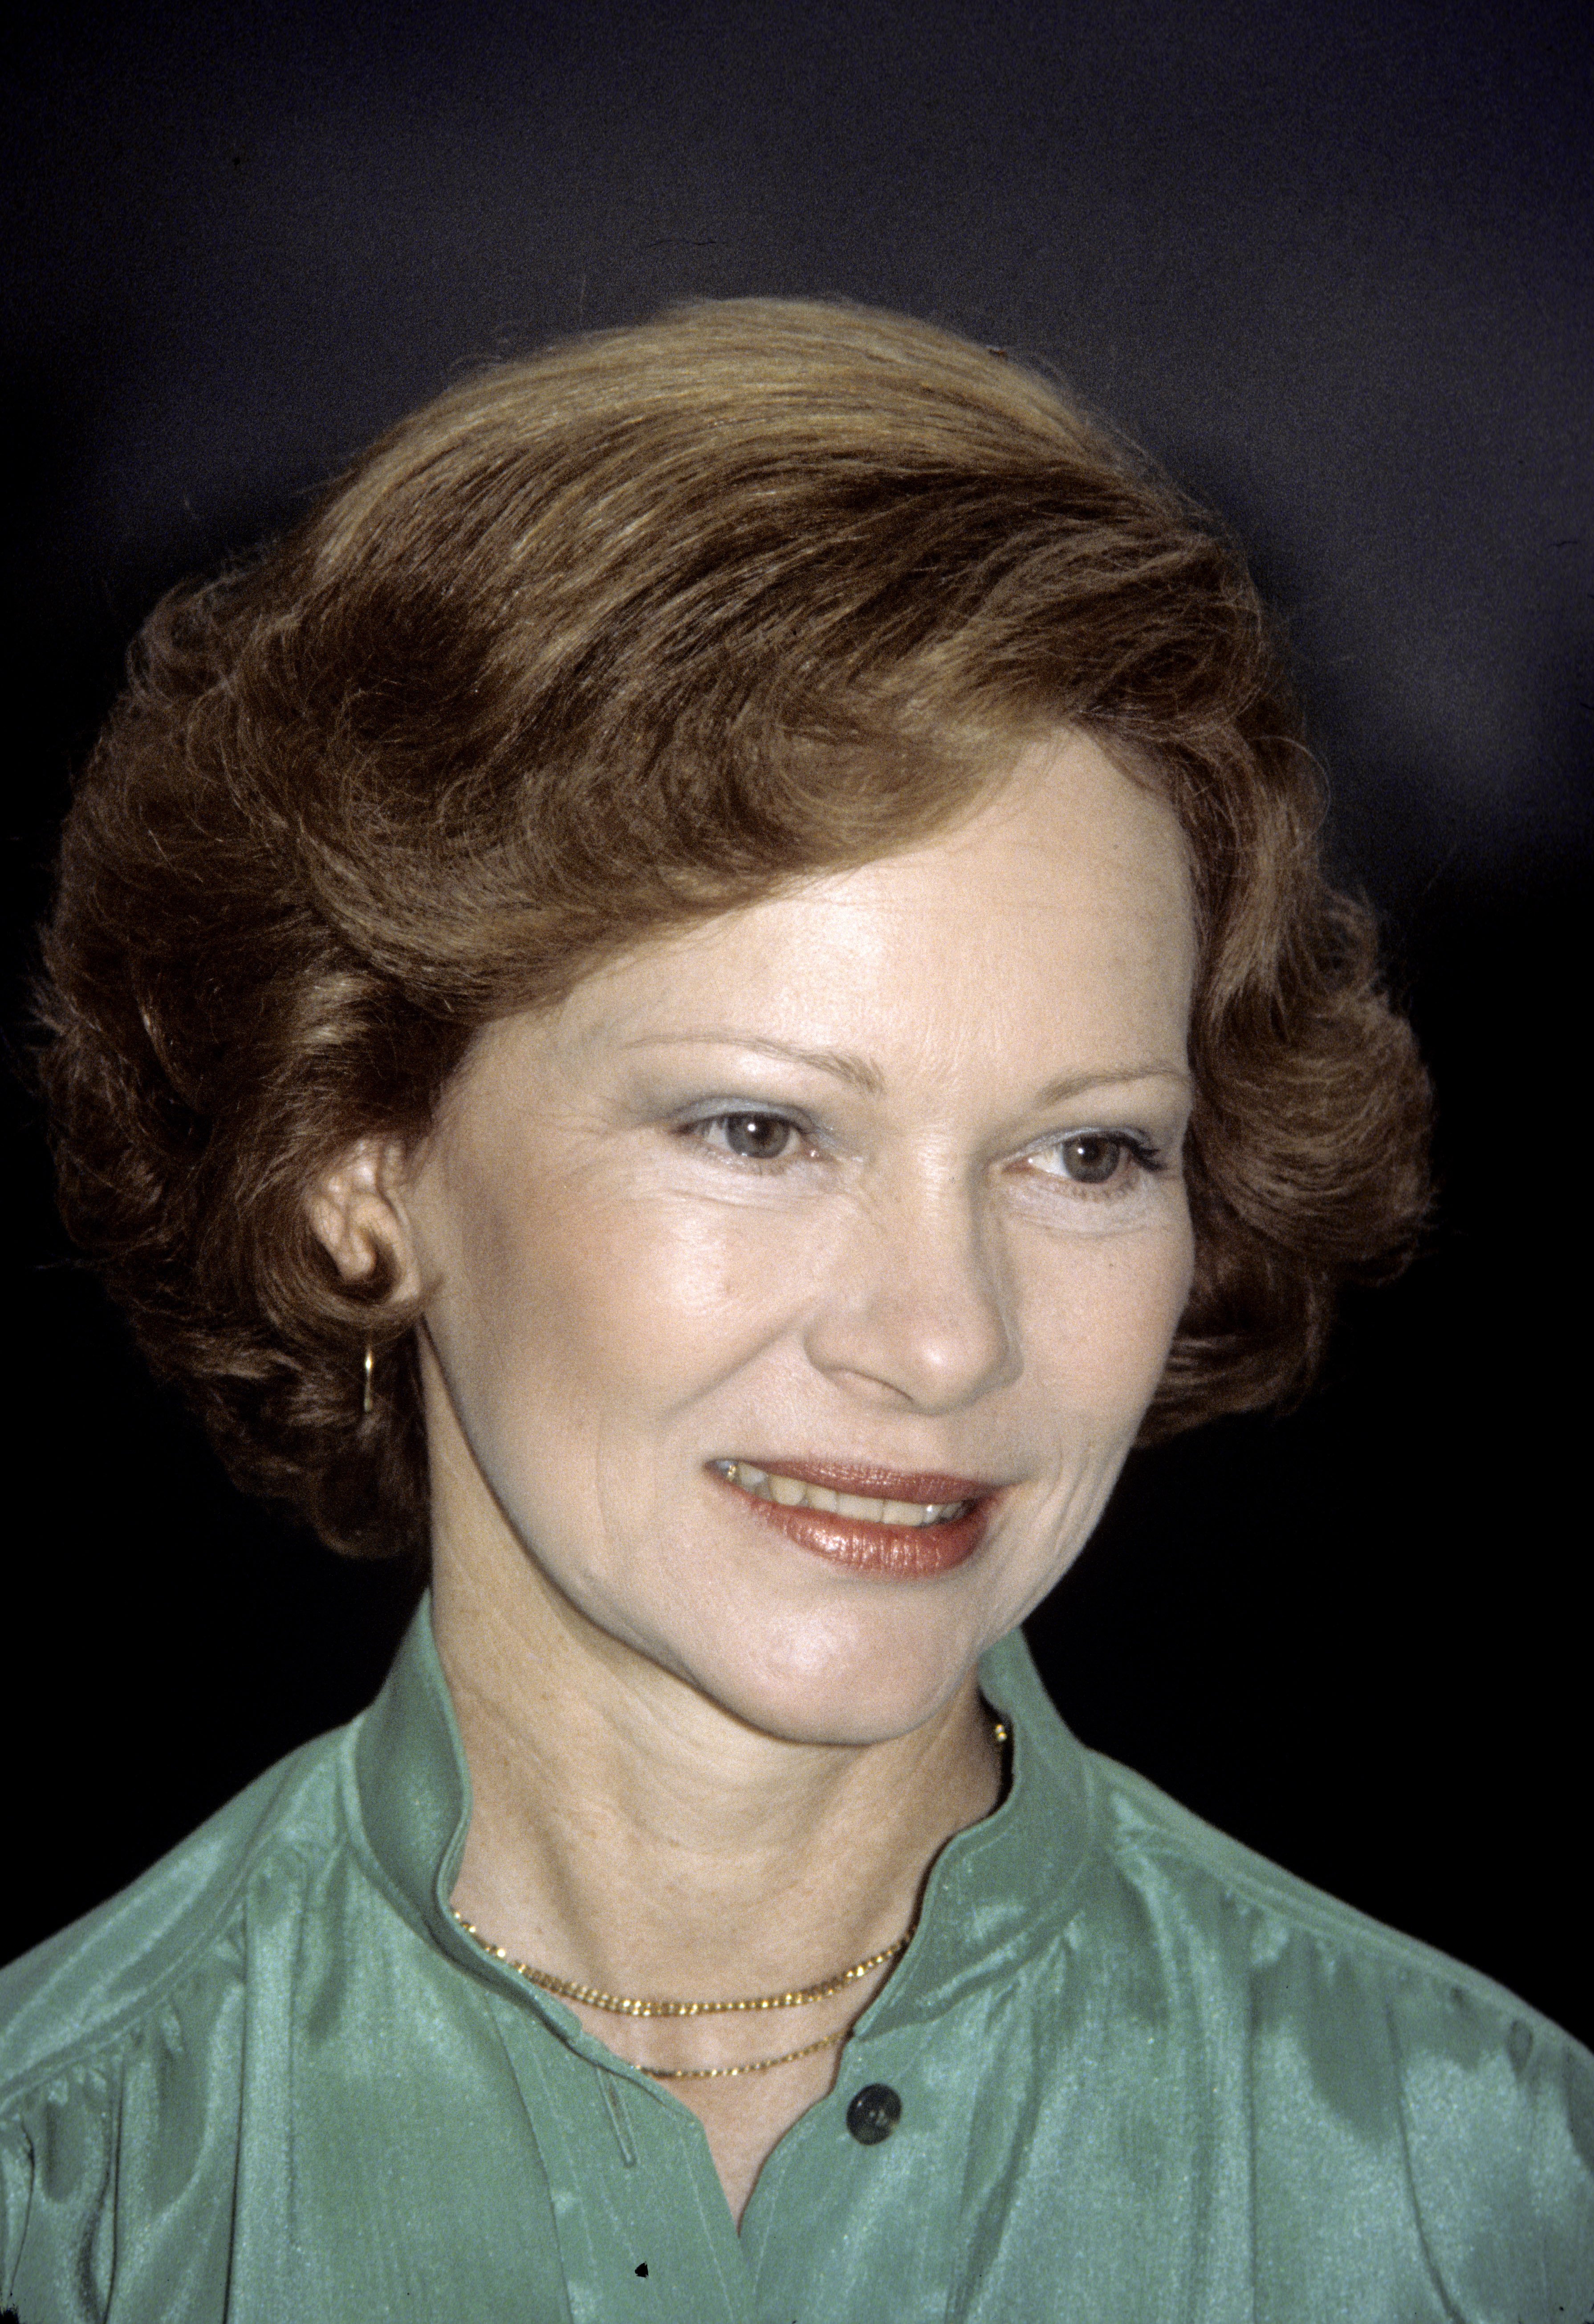 Rosalynn Carter on June 01, 1978 in the United States. | Source: Getty Images